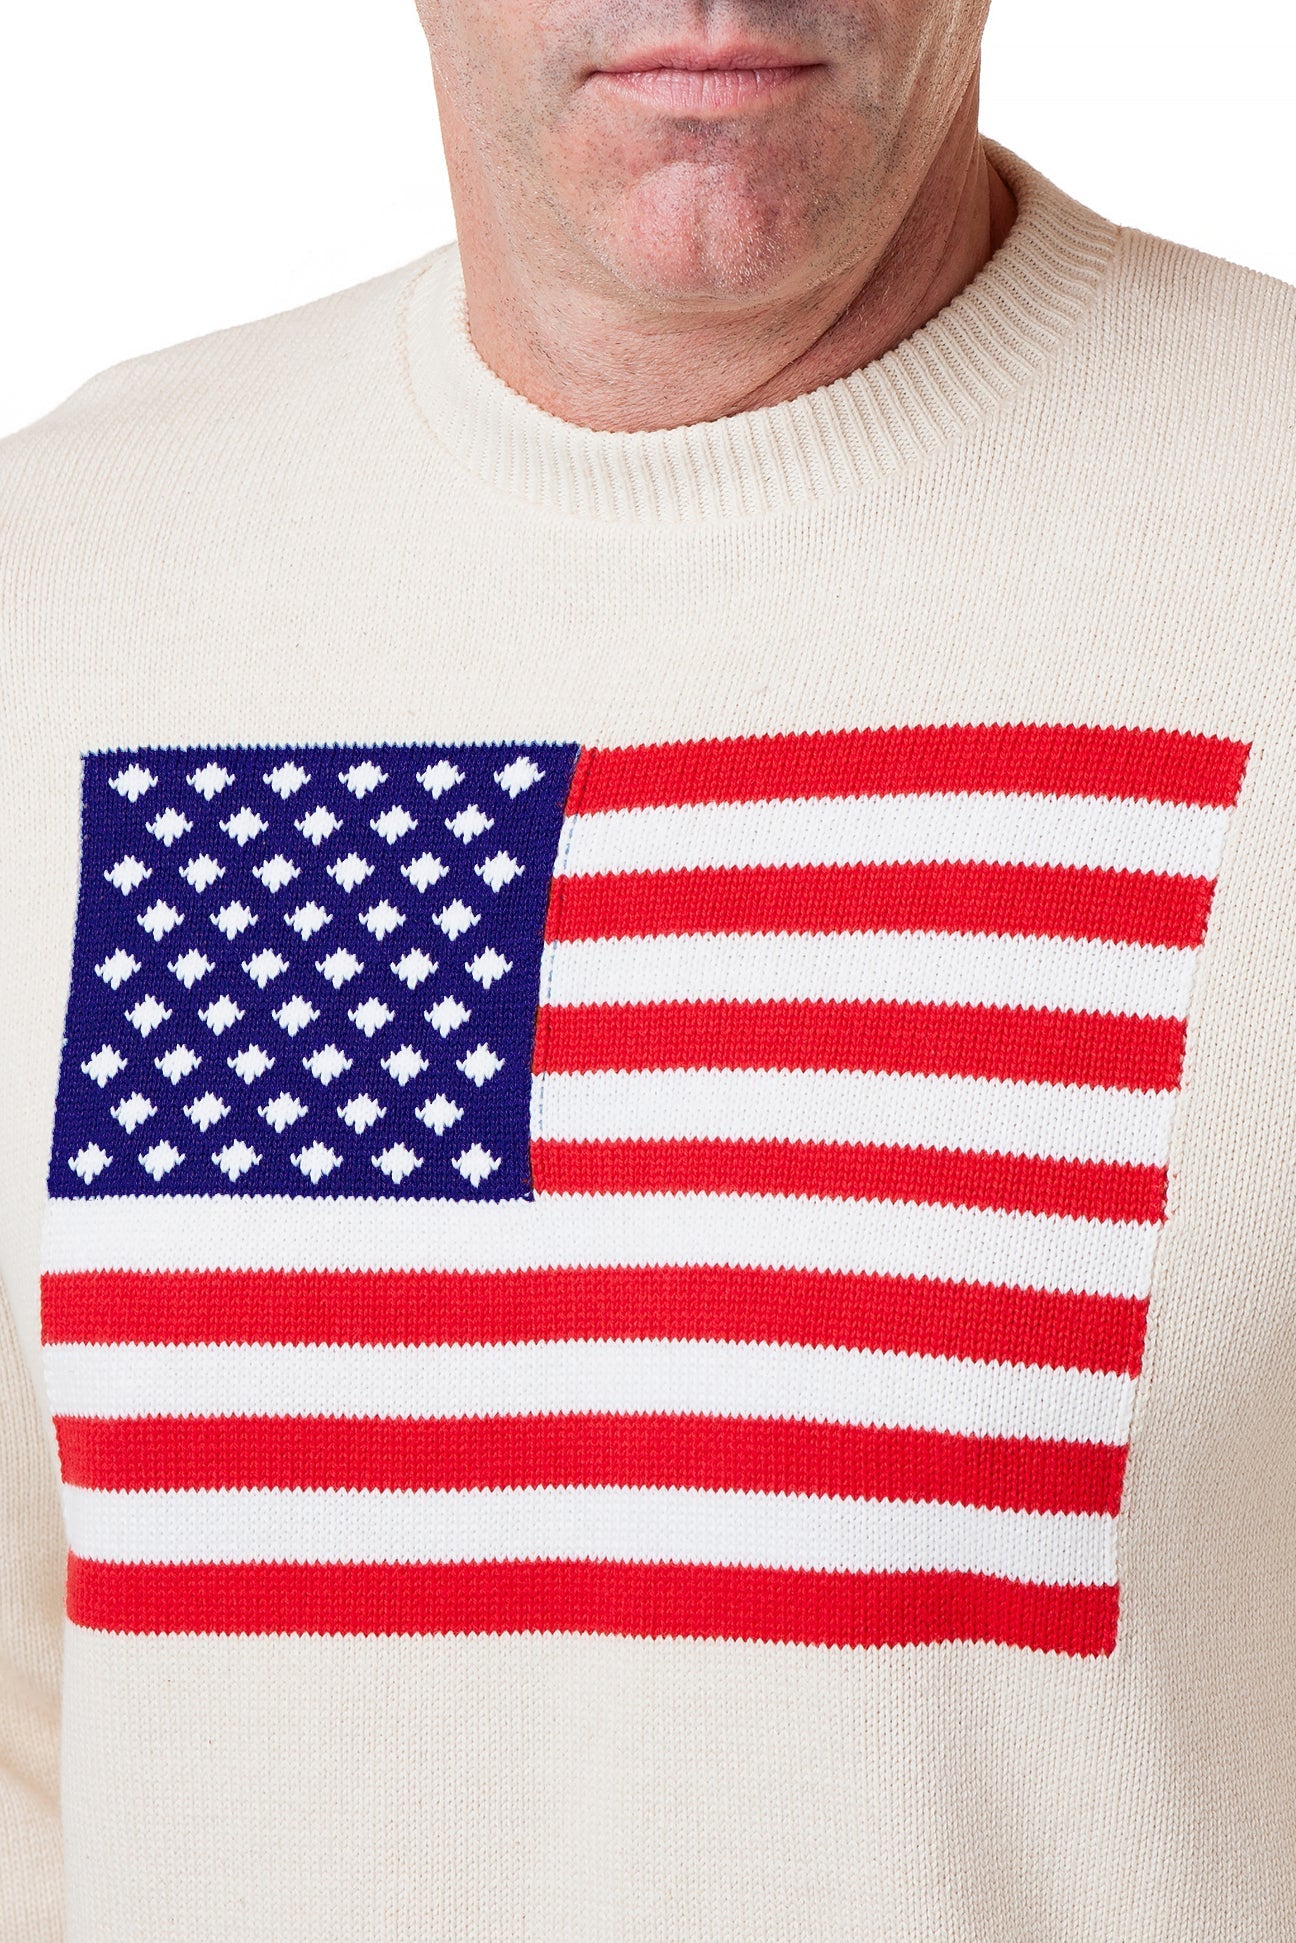 Crew Neck Sweater Cream With American Flag MENS OUTERWEAR Castaway Nantucket Island